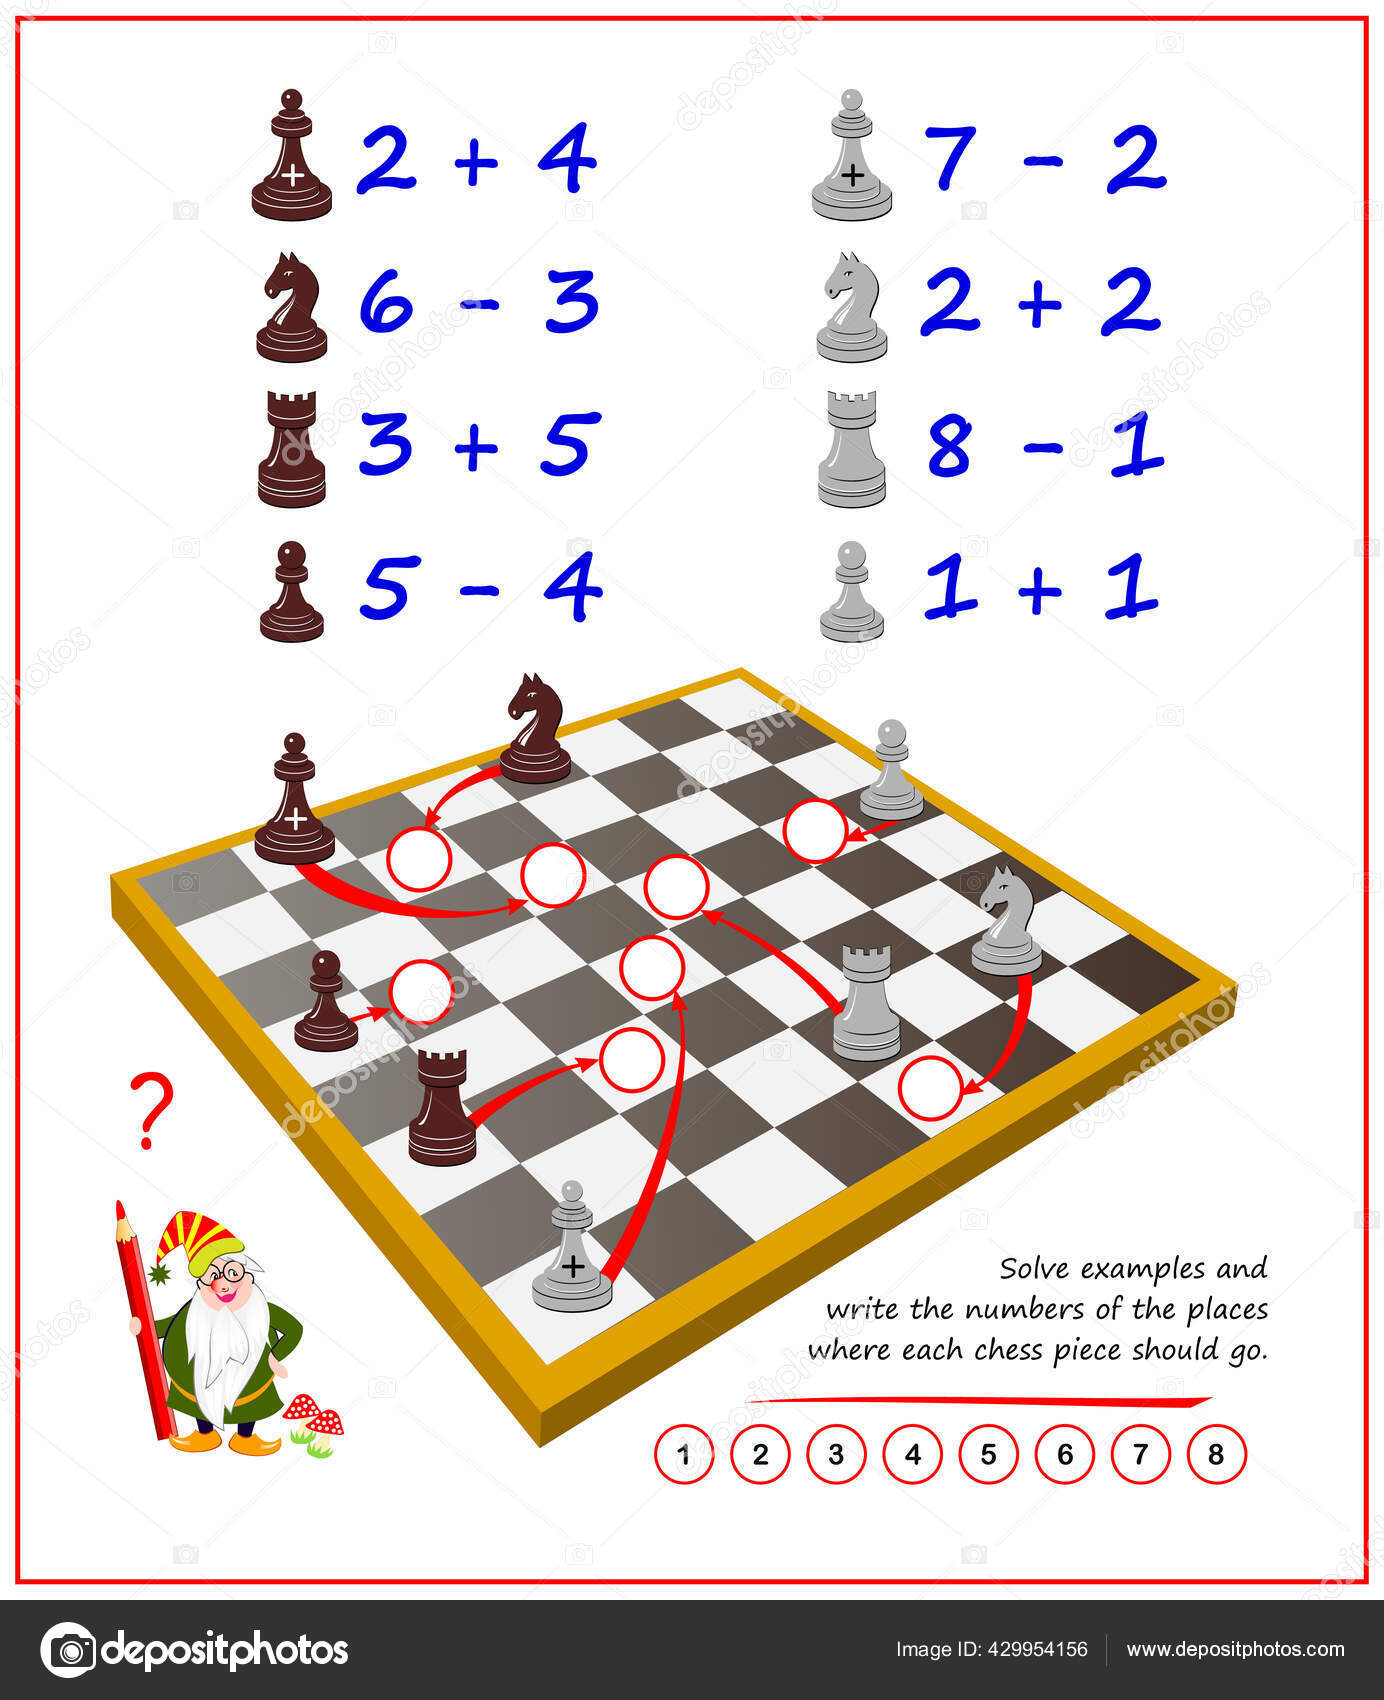 Chess by the Numbers